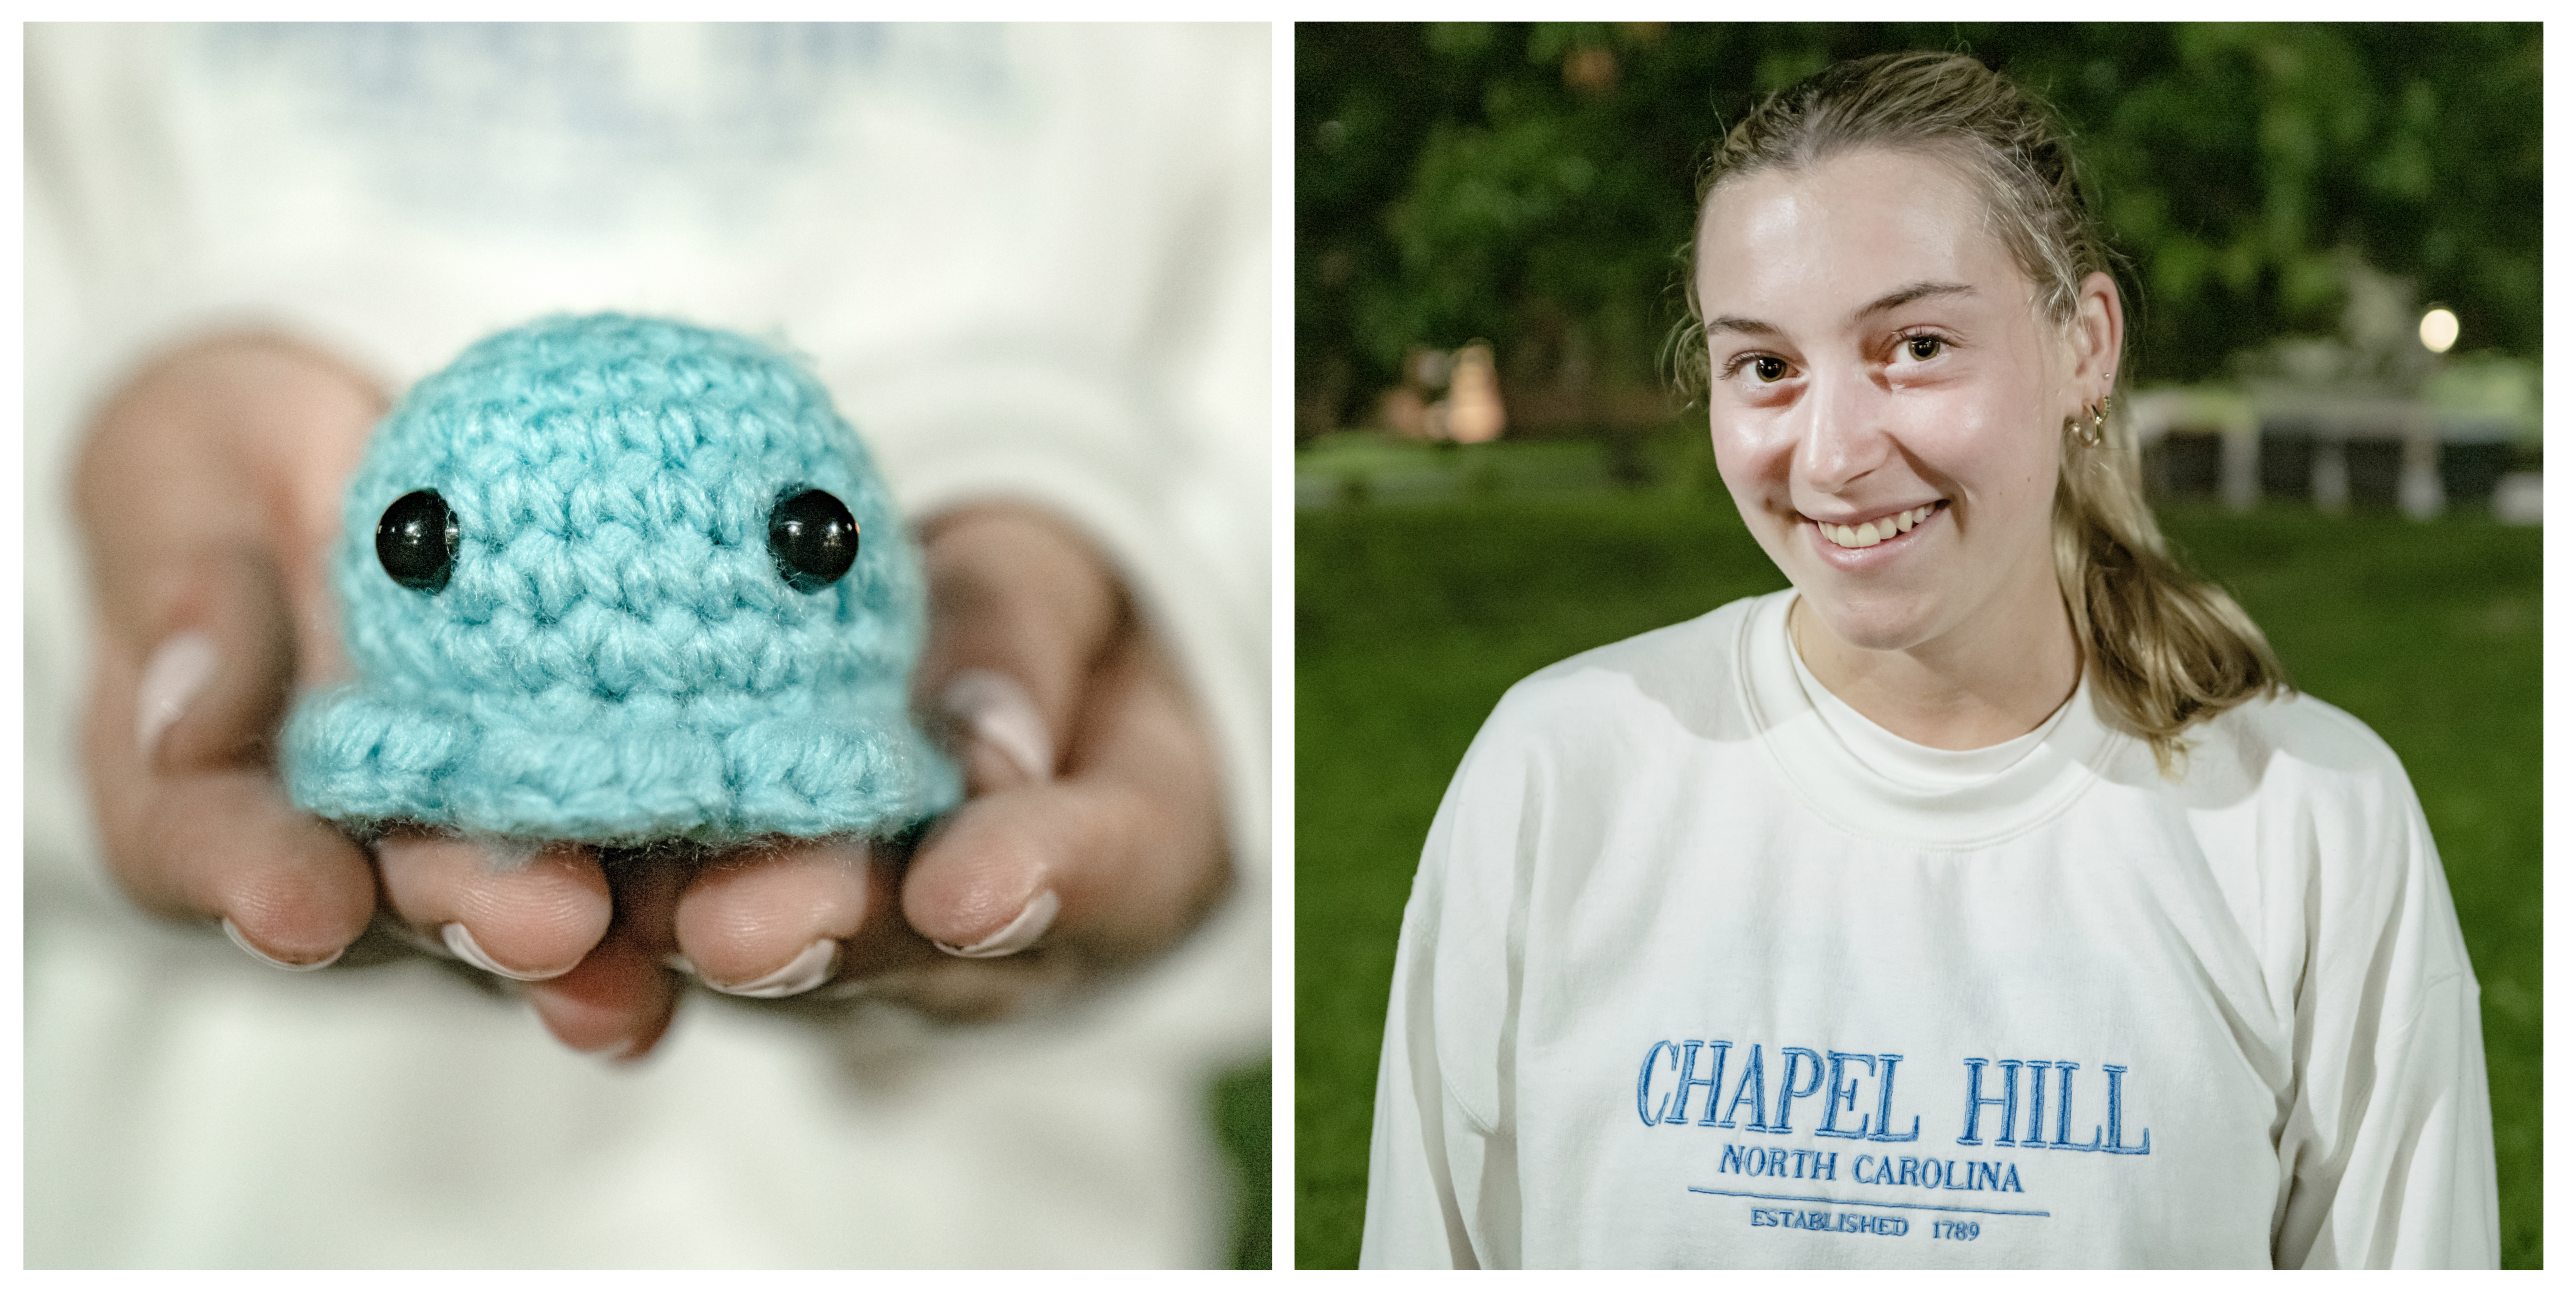 A two-photo collage: On the left is a closeup image of a student named Cori Miller holding a crocheted octopus, and on the right is a portrait of Cori.